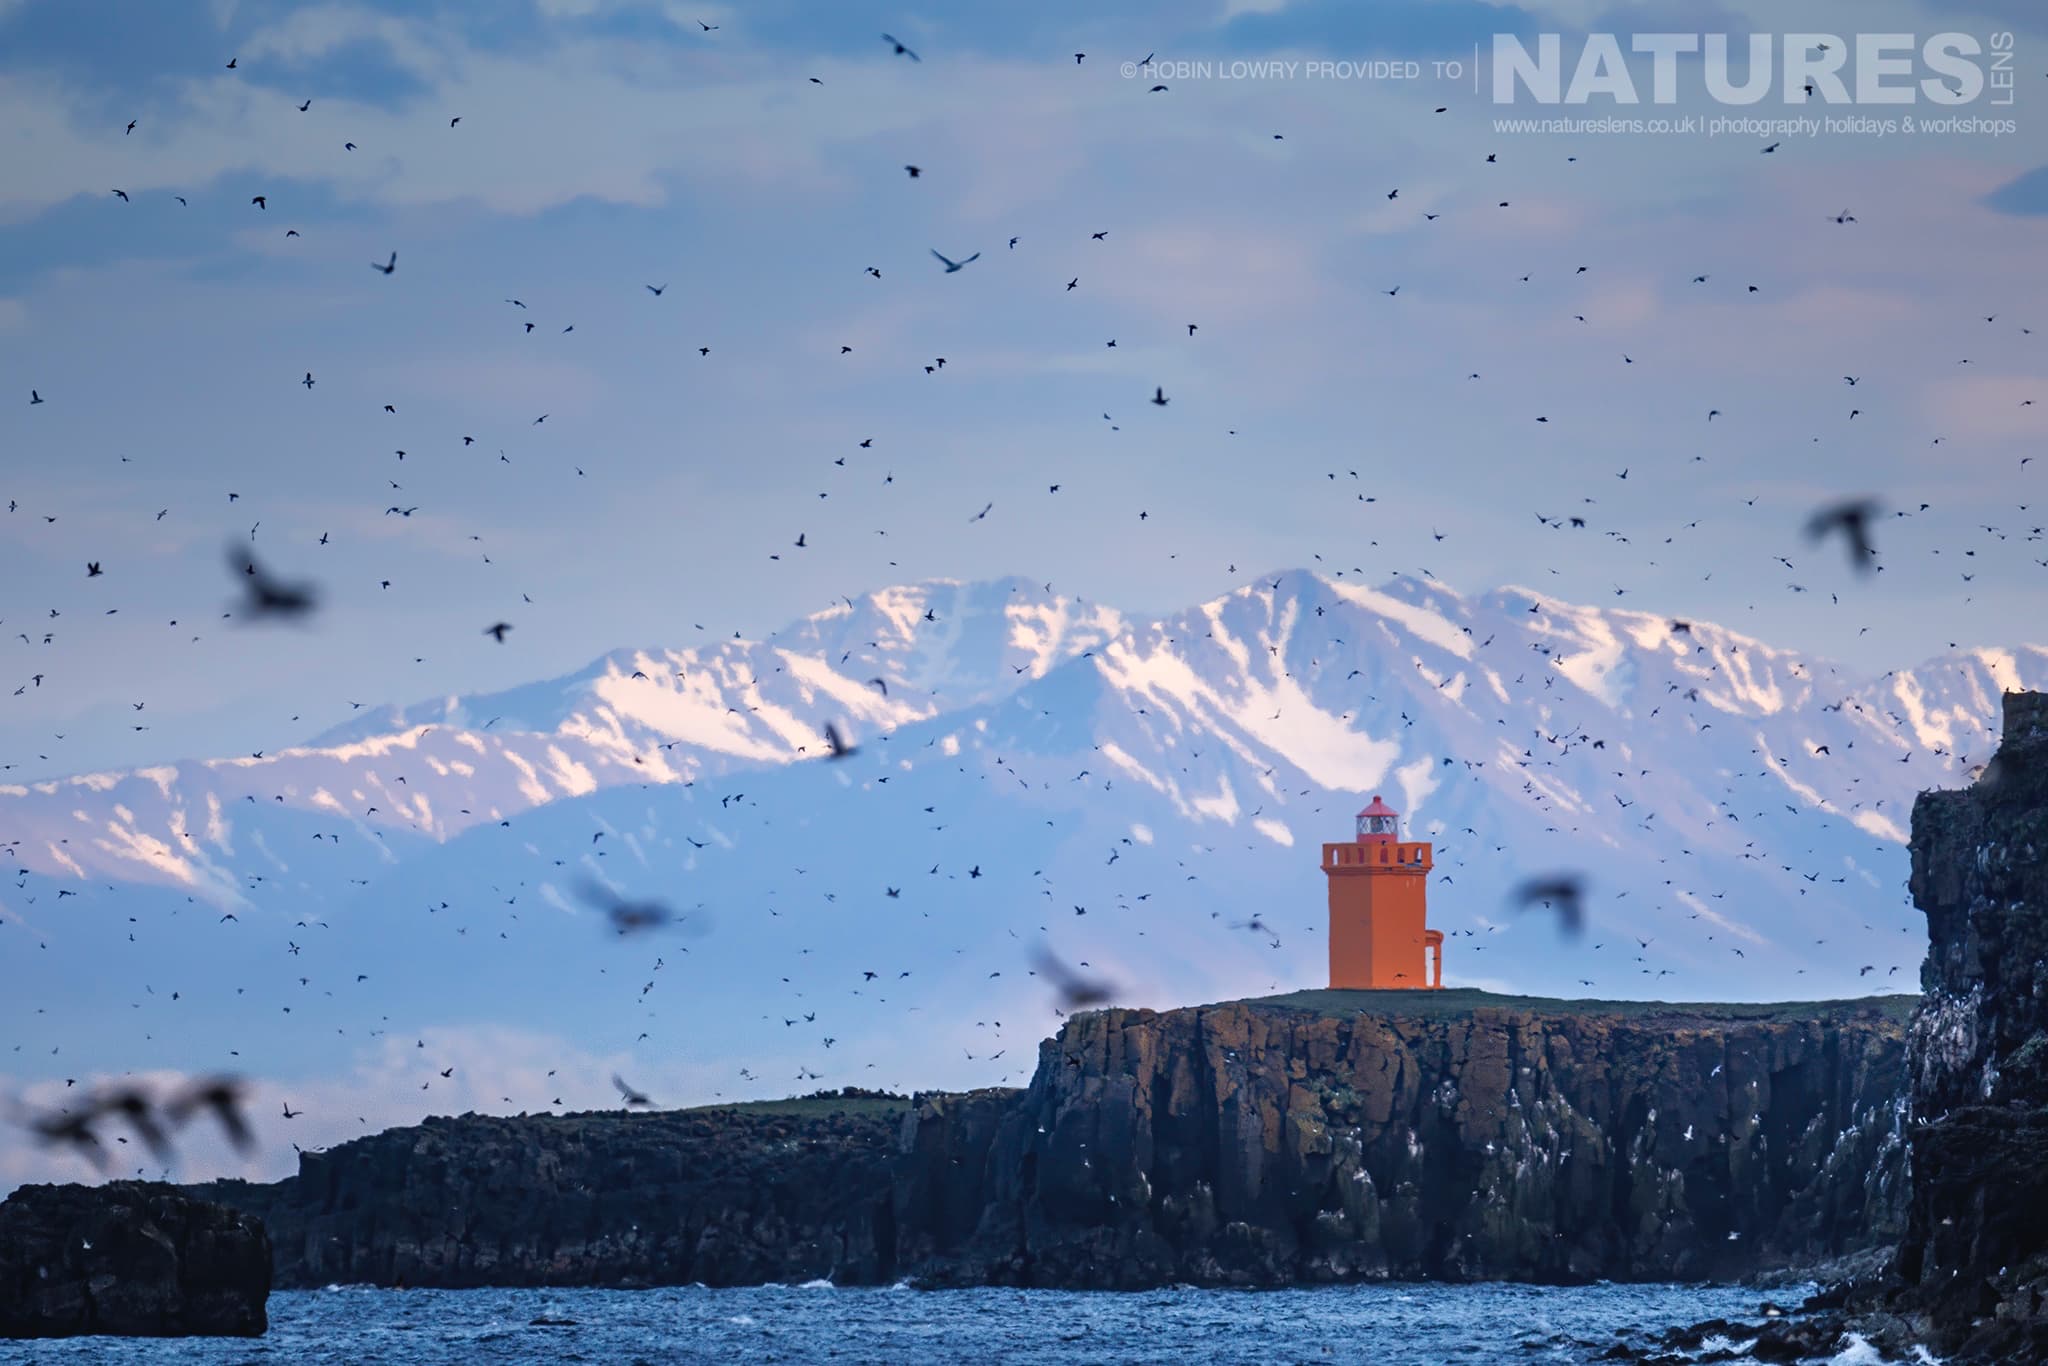 A Mass Of Puffins In Flight Over The Famous Lighthouse Found On Grímsey Island